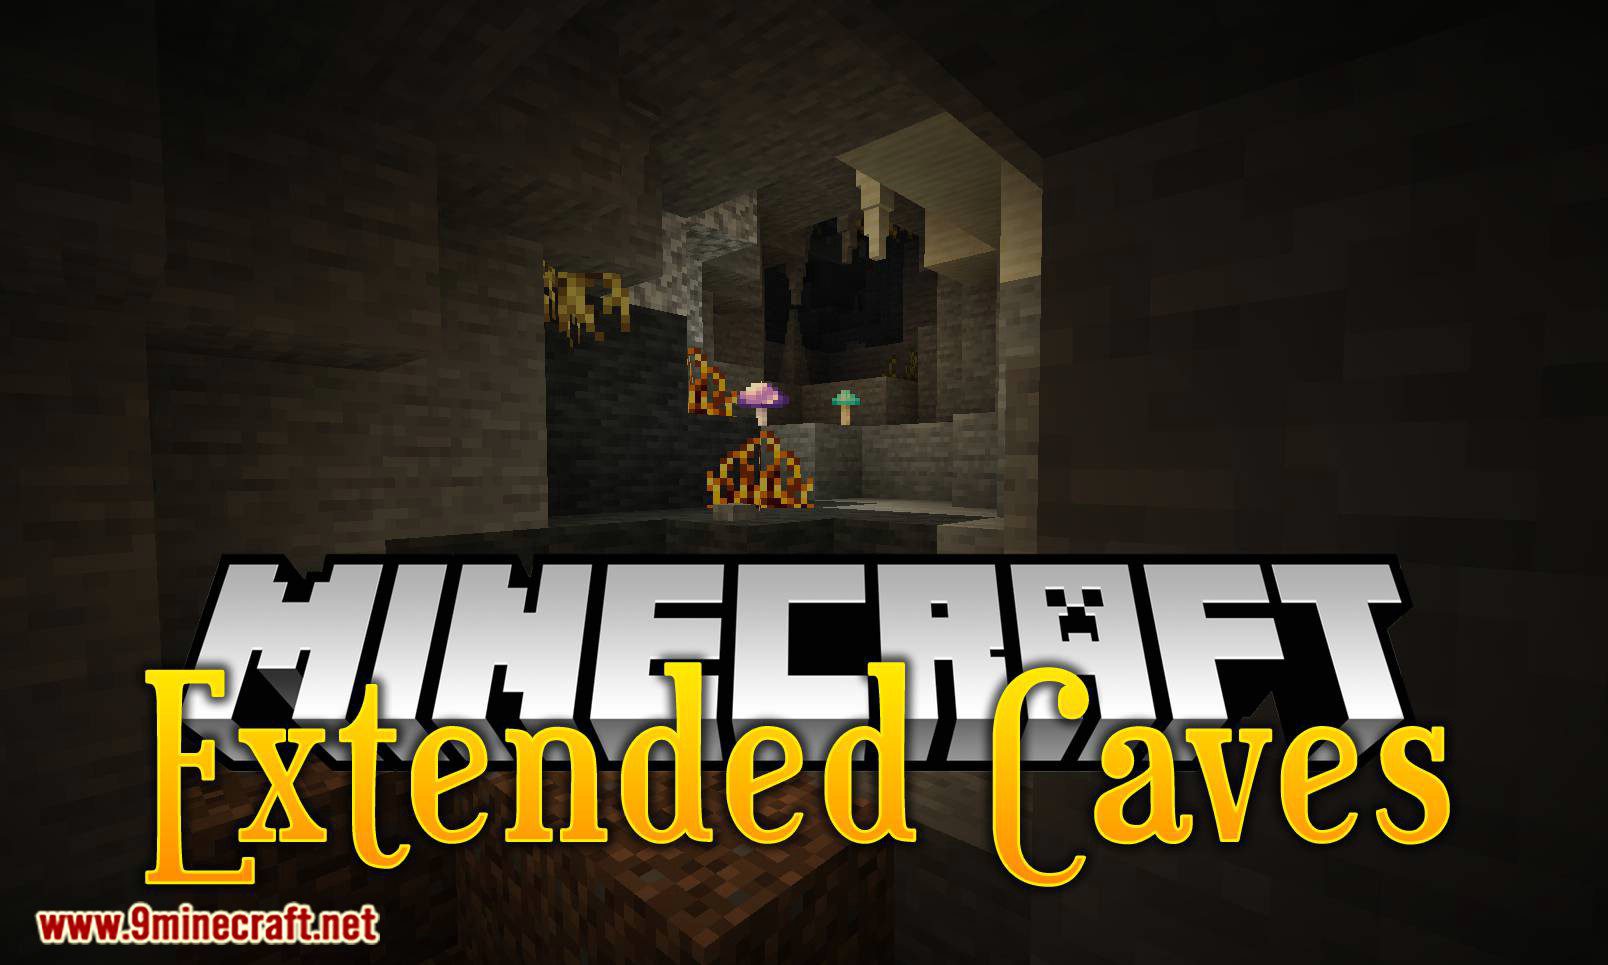 Extended Caves Mod 1.16.5, 1.14.4 (Do You Think Minecraft Caves are Boring?) 1